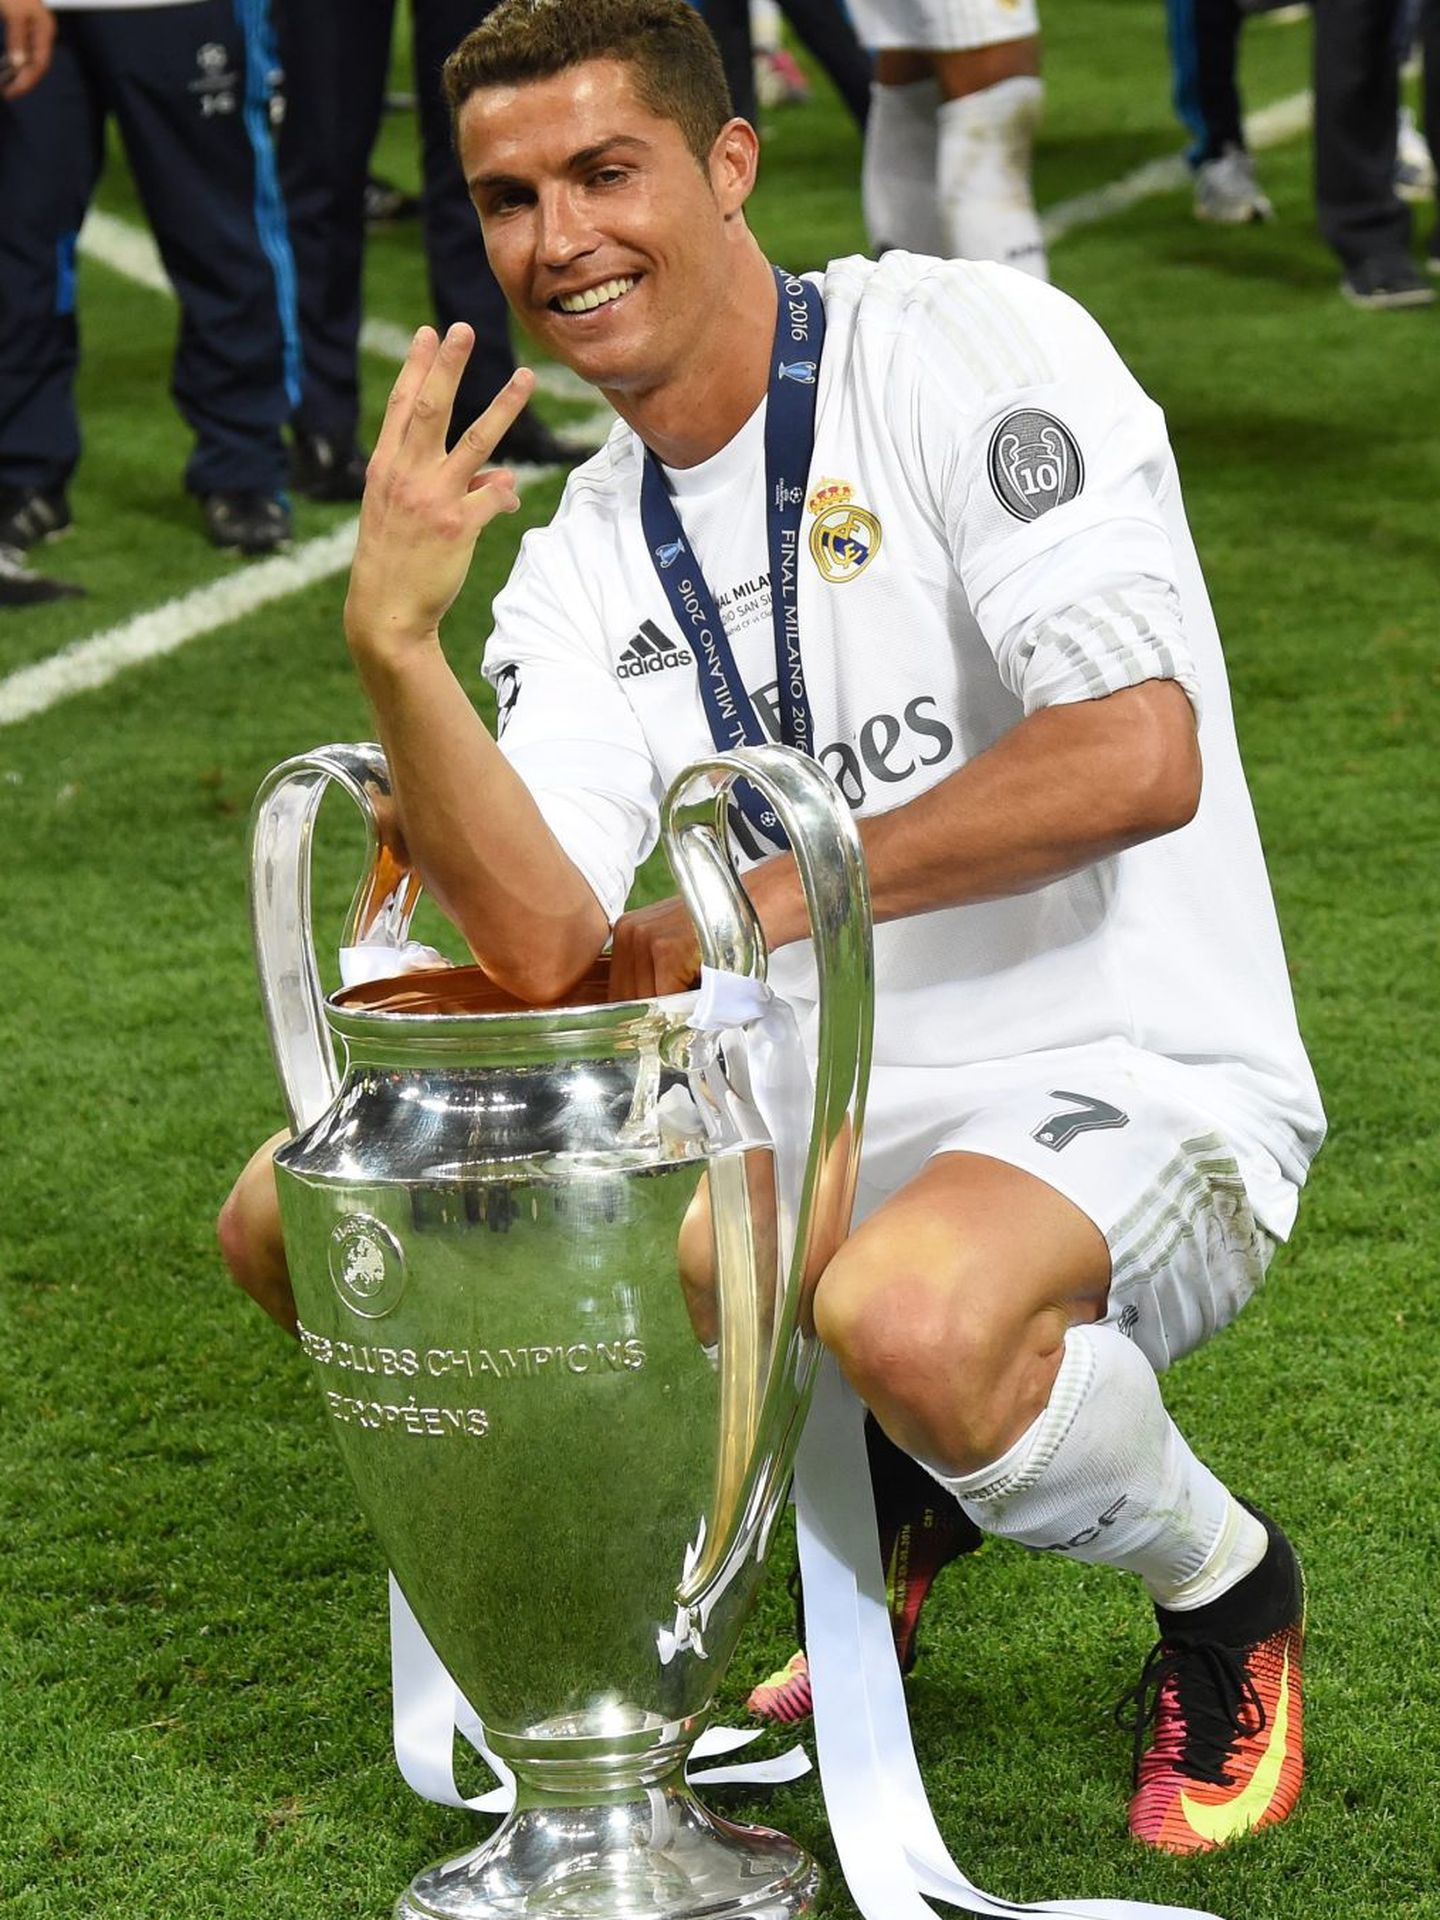 . Milan (Italy), 28 05 2016.- Real's Cristiano Ronaldo poses with the trophy after winning the UEFA Champions League Final between Real Madrid and Atletico Madrid at the Giuseppe Meazza stadium in Milan, Italy, 28 May 2016. (Liga de Campeones, Italia) EFE EPA DANIEL DAL ZENNARO